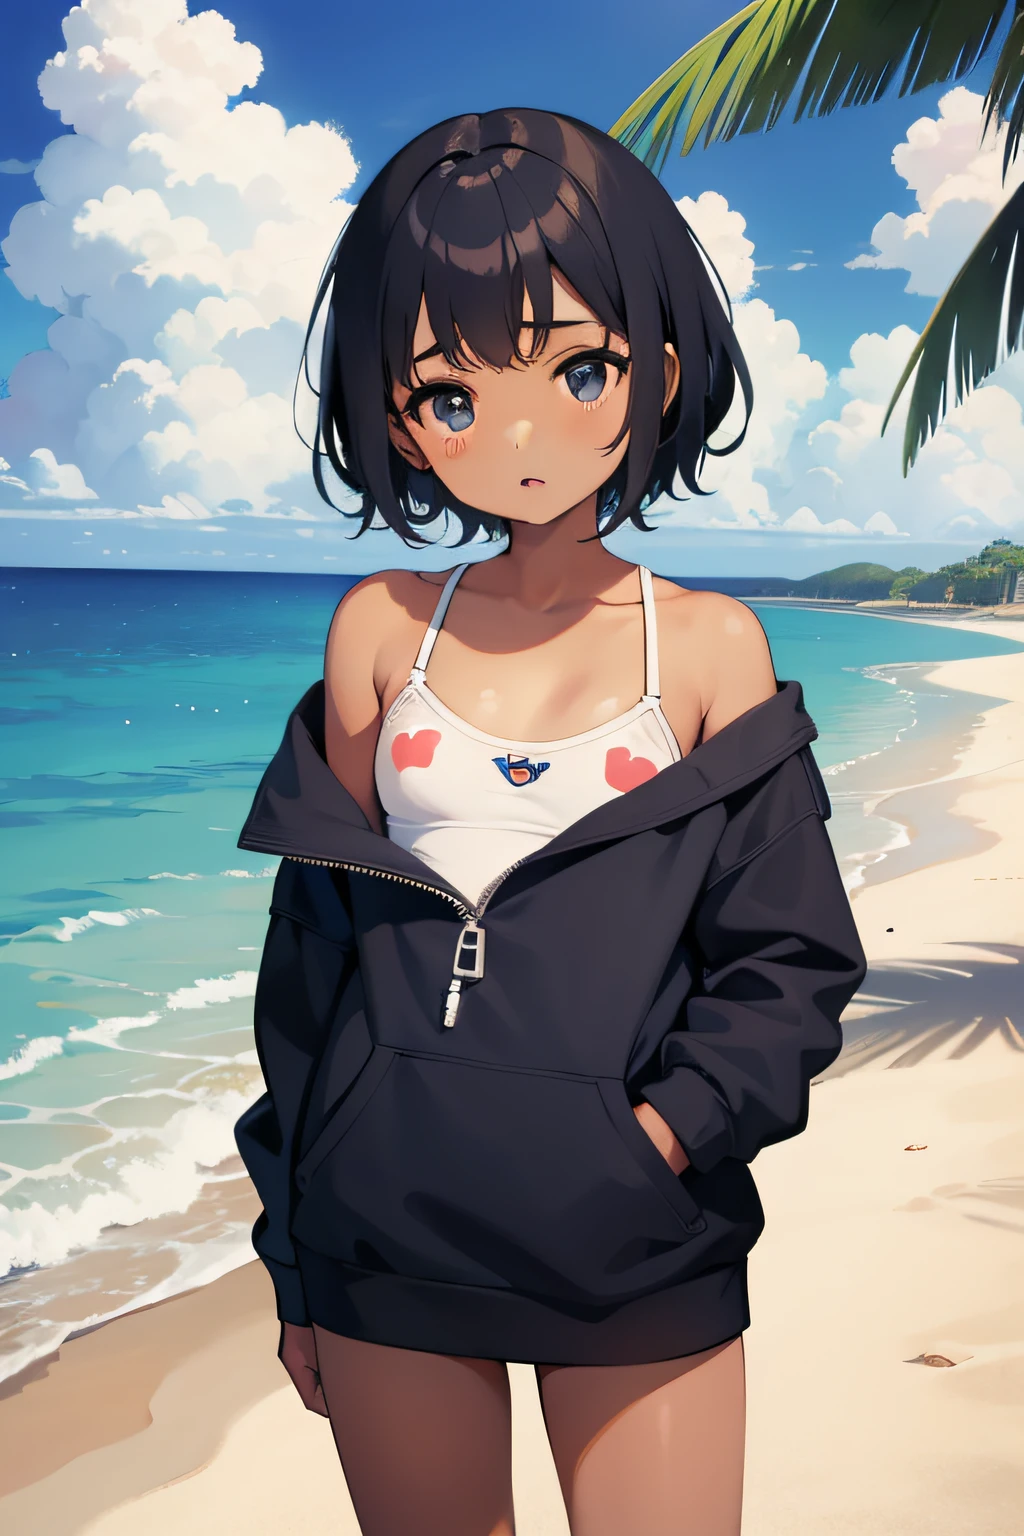 Cute African American Girl、 actor、Risa Miyazaki、Slouched、short、Nip slip 、can be seen through the gaps in the clothes、The shape of nipple is clearly visible、Small、Anatomically correct body、Accurate drawing、​masterpiece、the beach